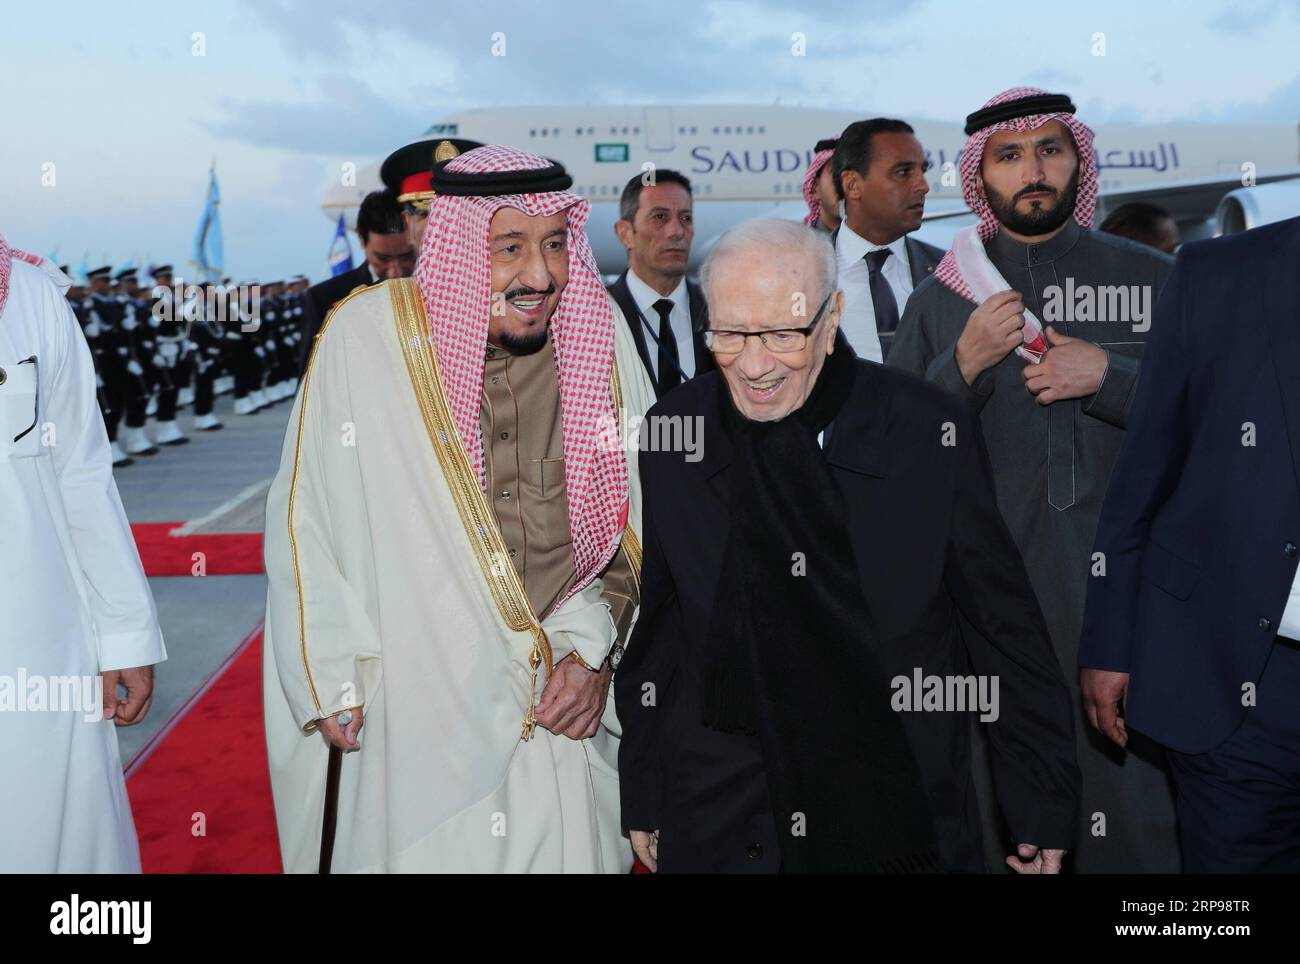 (190328) -- TUNIS, March 28, 2019 -- Tunisian President Beji Caid Essebsi (R, Front) welcomes Saudi King Salman bin Abdulaziz Al Saud (L, Front) at an airport in Tunis, Tunisia, on March 28, 2019. Saudi King Salman bin Abdulaziz Al Saud started Thursday an official visit to Tunisia. ) TUNISIA-TUNIS-SAUDI ARABIA-KING-VISIT AdelexEzzine PUBLICATIONxNOTxINxCHN Stock Photo